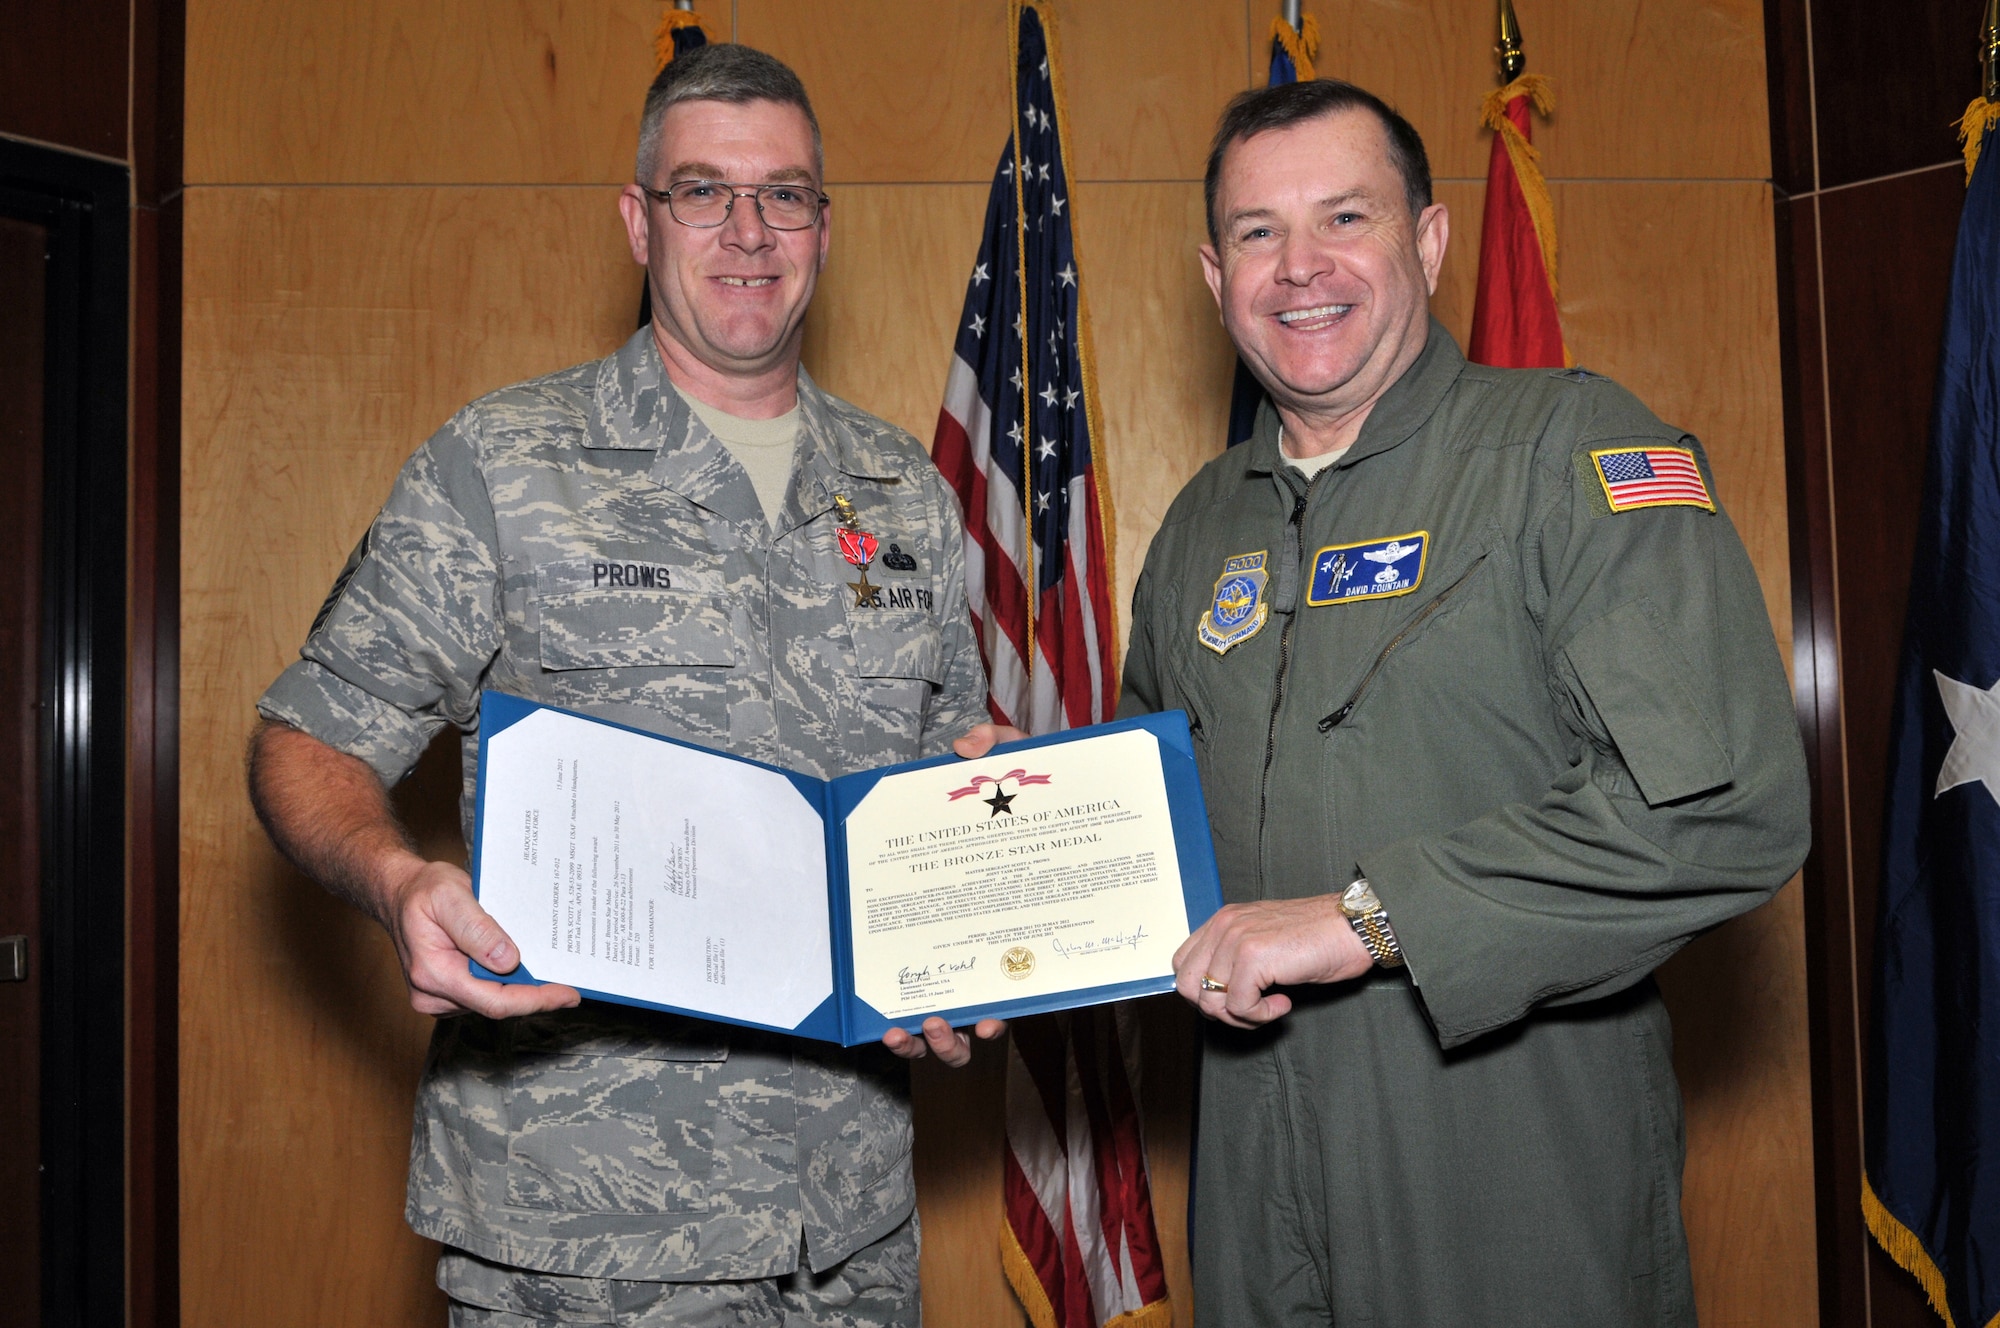 Master Sergeant Scott Prows, from the 130th Engineering Installation Squadron, posed with Brig. Gen. David Fountain, the Assistant Adjutant General for Air, after receiving the Bronze Star medal. For deployment achievements supporting Operation Enduring Freedom during 2011 and 2012, two Bronze Stars and 28 additional medals were awarded to 18 members of the 130 EIS during a ceremony at the Utah Air National Guard Base Jan. 6. (U.S. Air Force photo by Tech. Sgt. Jeremy Giacoletto-Stegall)(RELEASED)